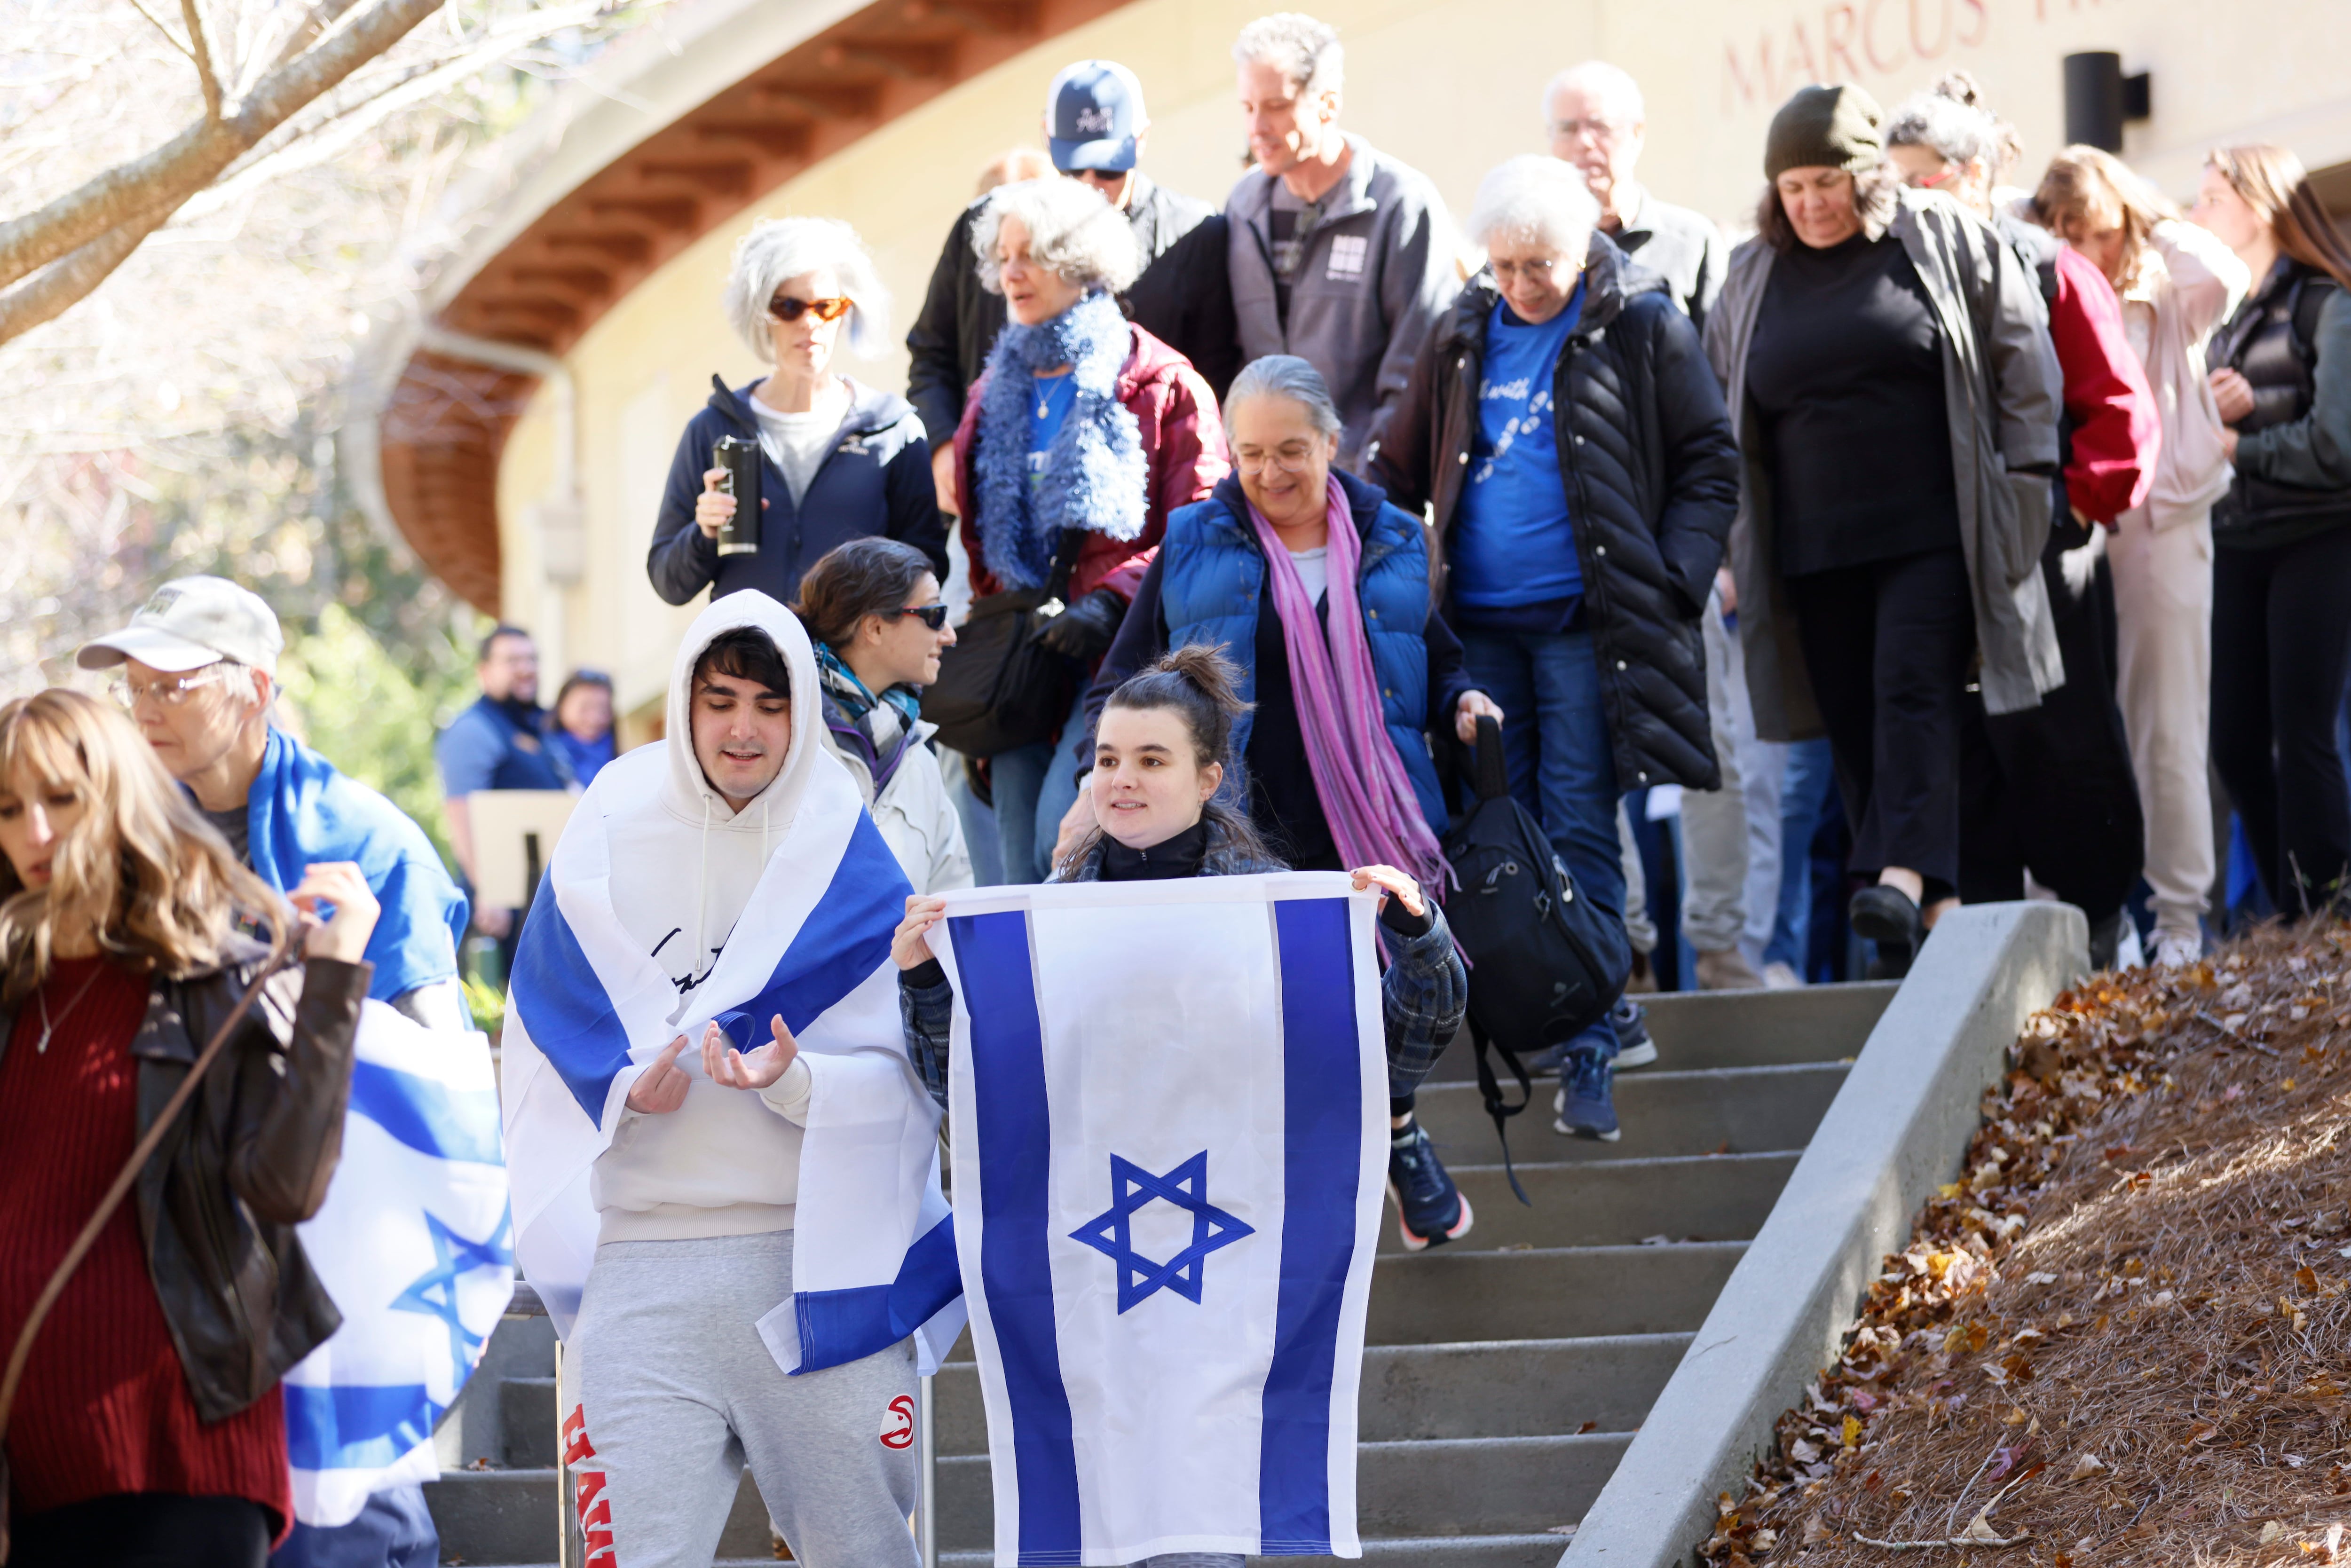 Jewish communities in Georgia gather to support college students